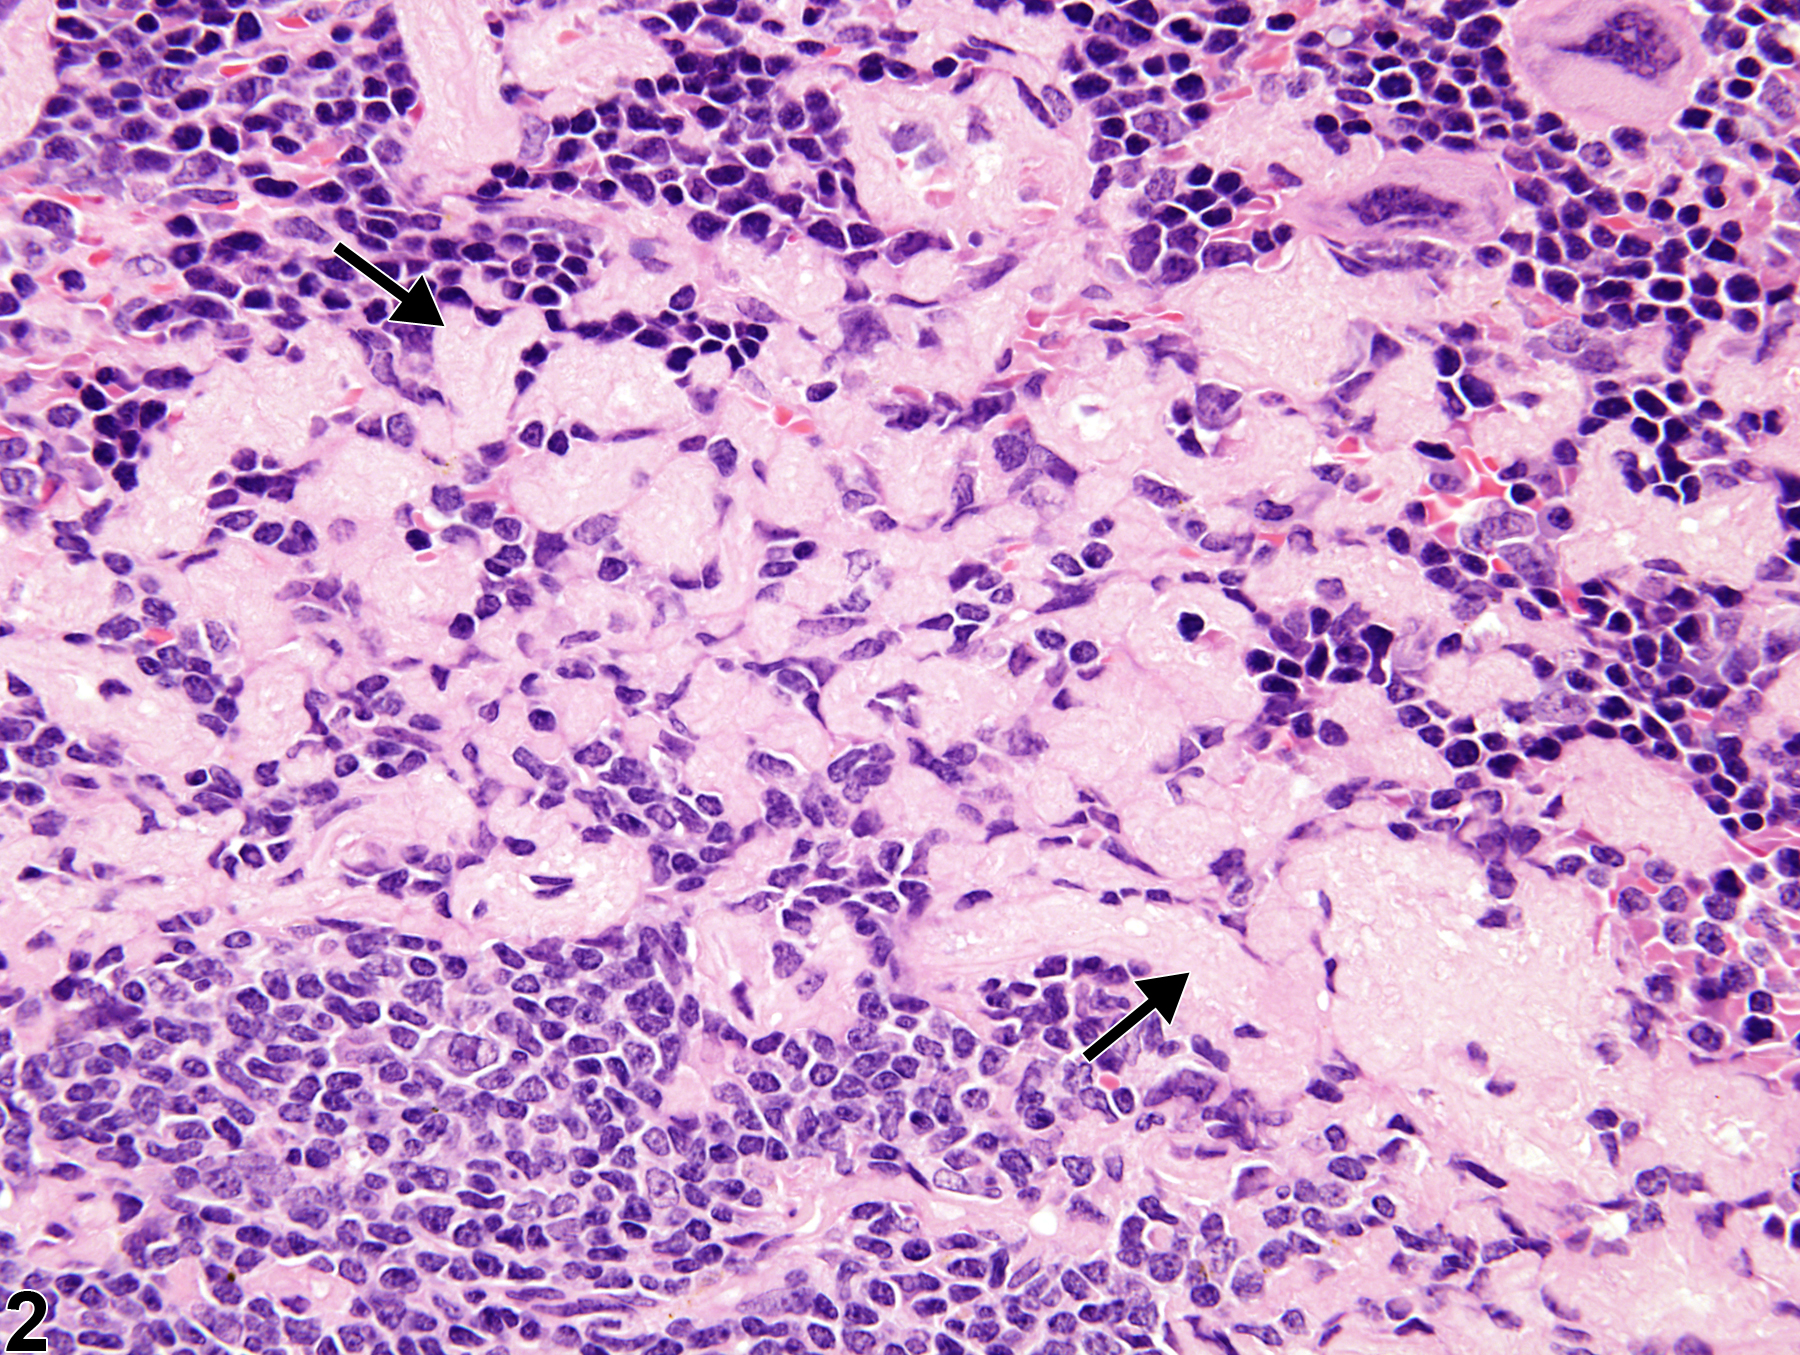 Image of amyloid in the spleen from a male B6C3F1/N mouse in a chronic study